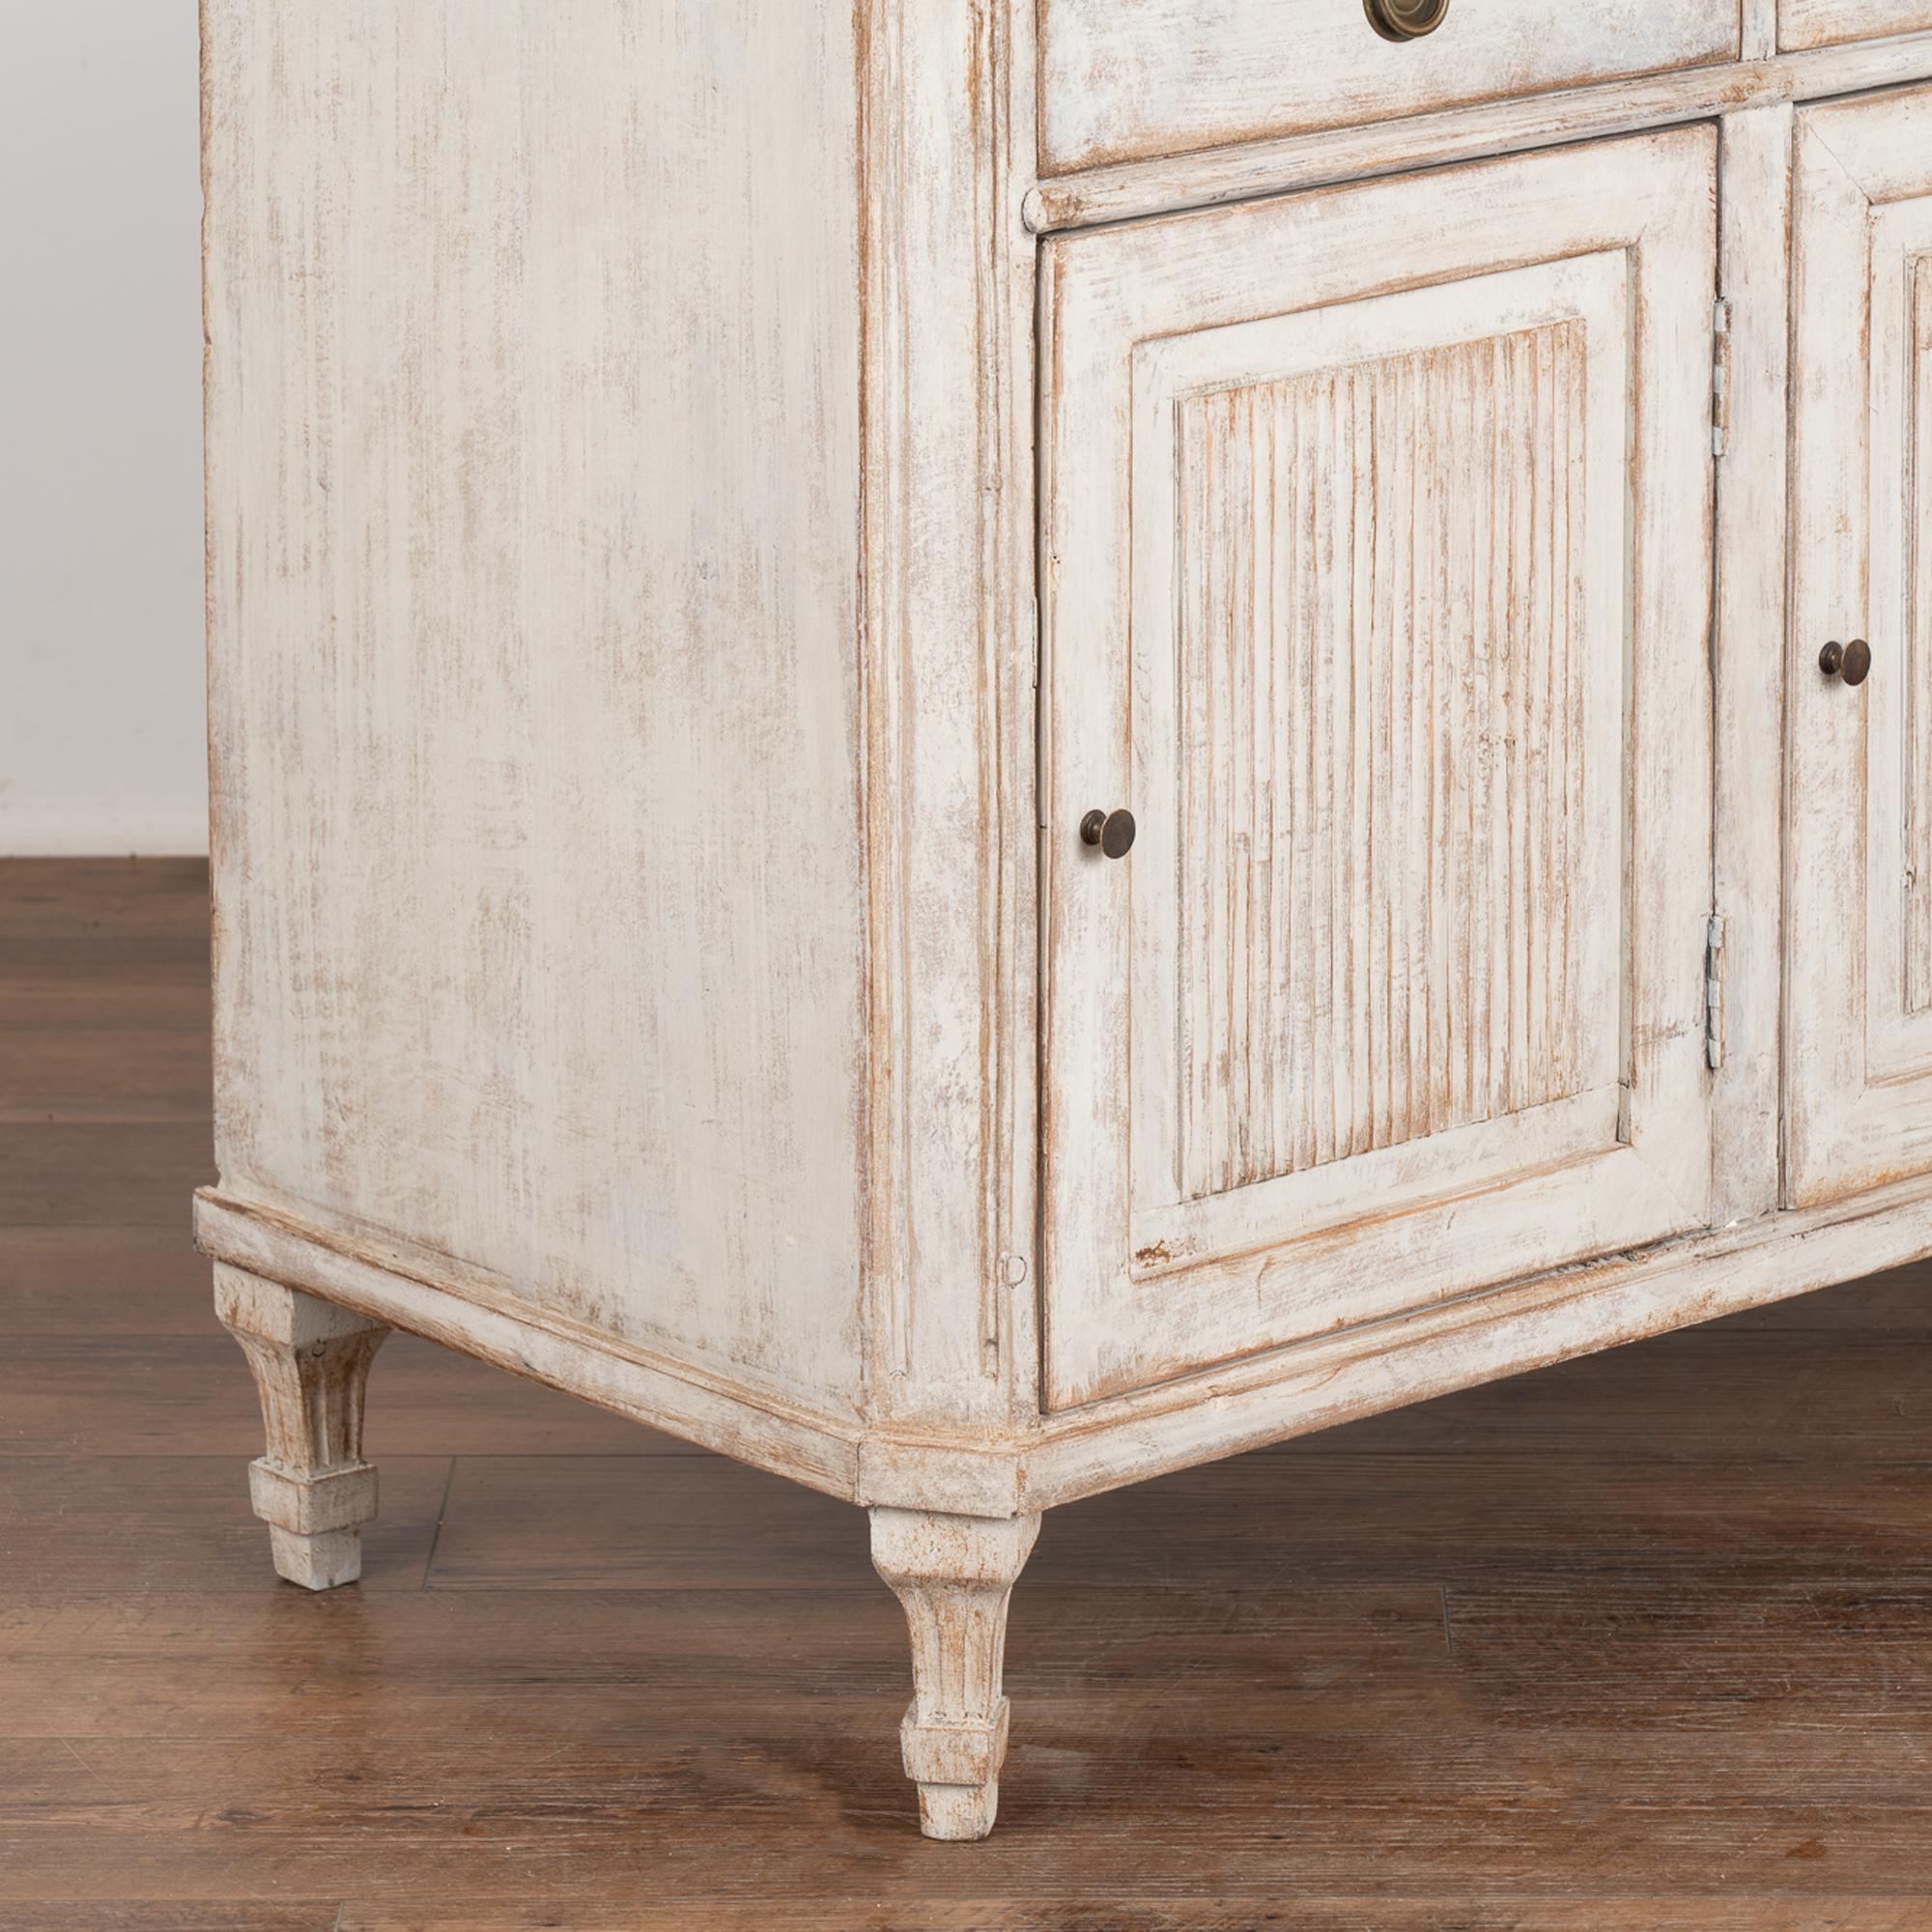 Swedish Gustavian Small White Sideboard or Console, circa 1840-60 For Sale 1